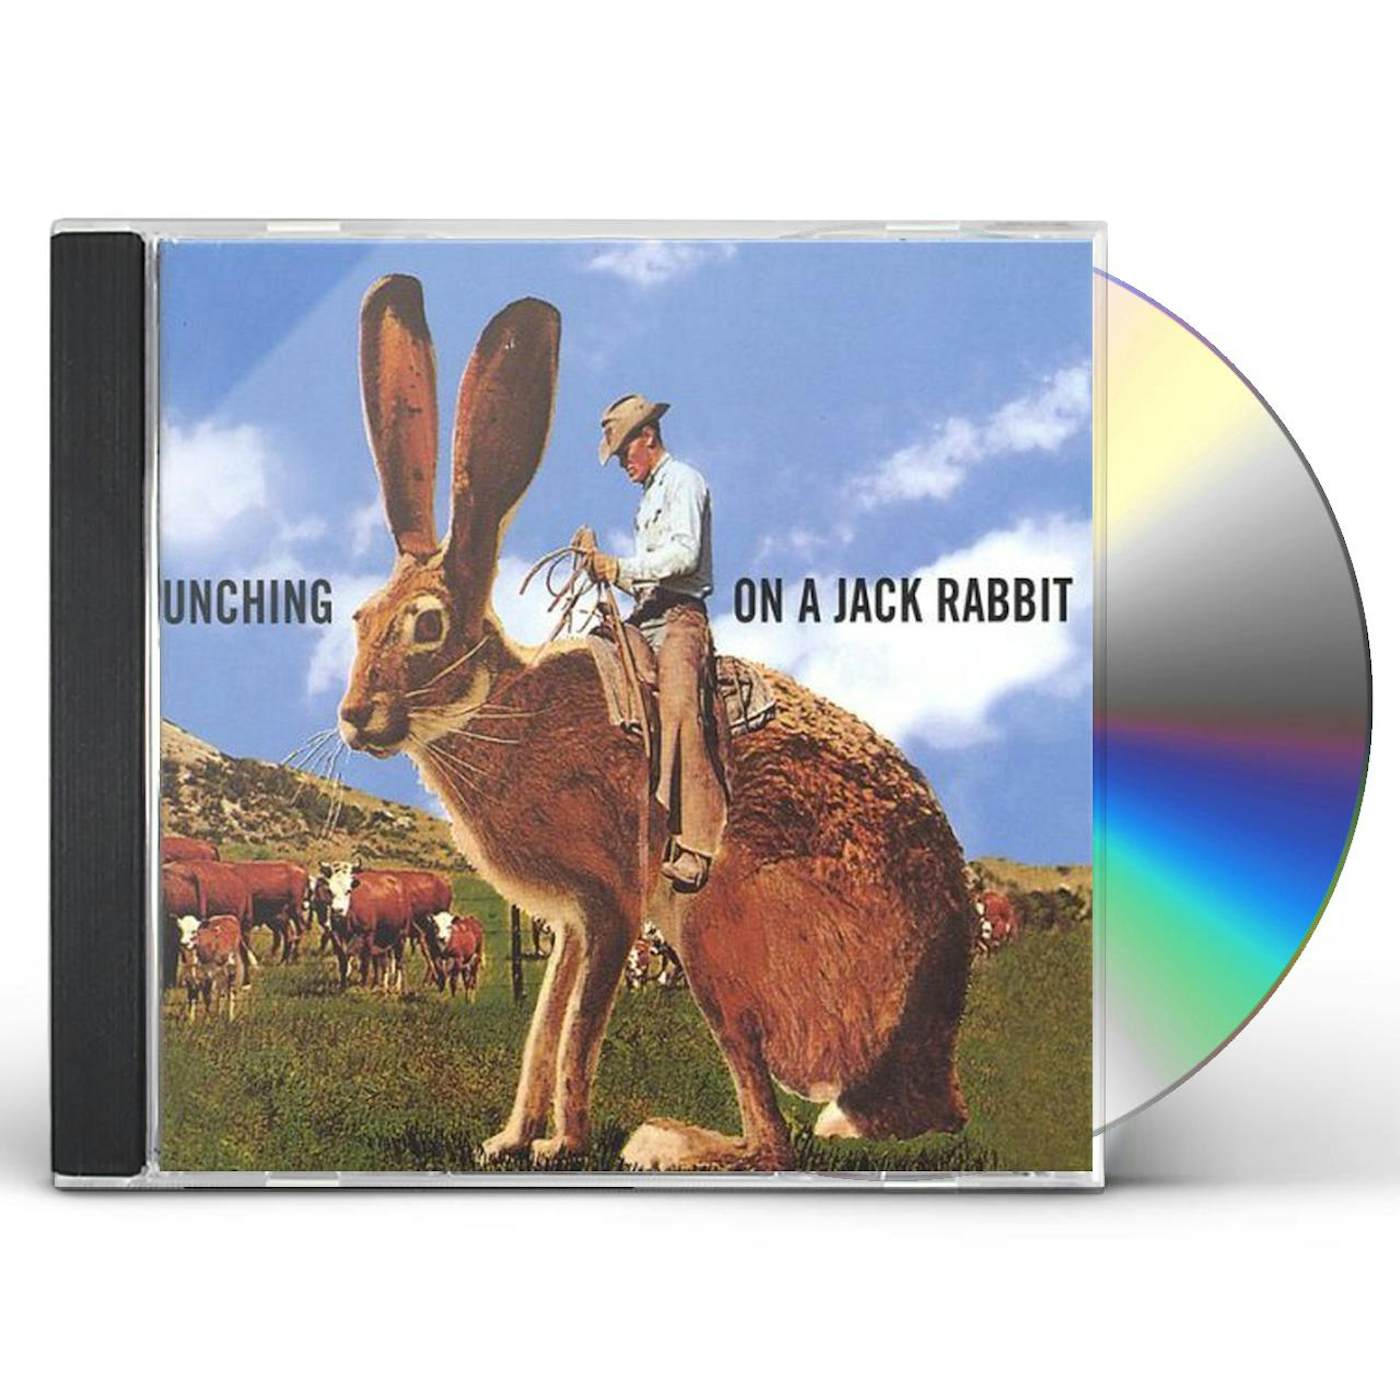 Before Braille CATTLE PUNCHING ON A JACK RABBIT CD